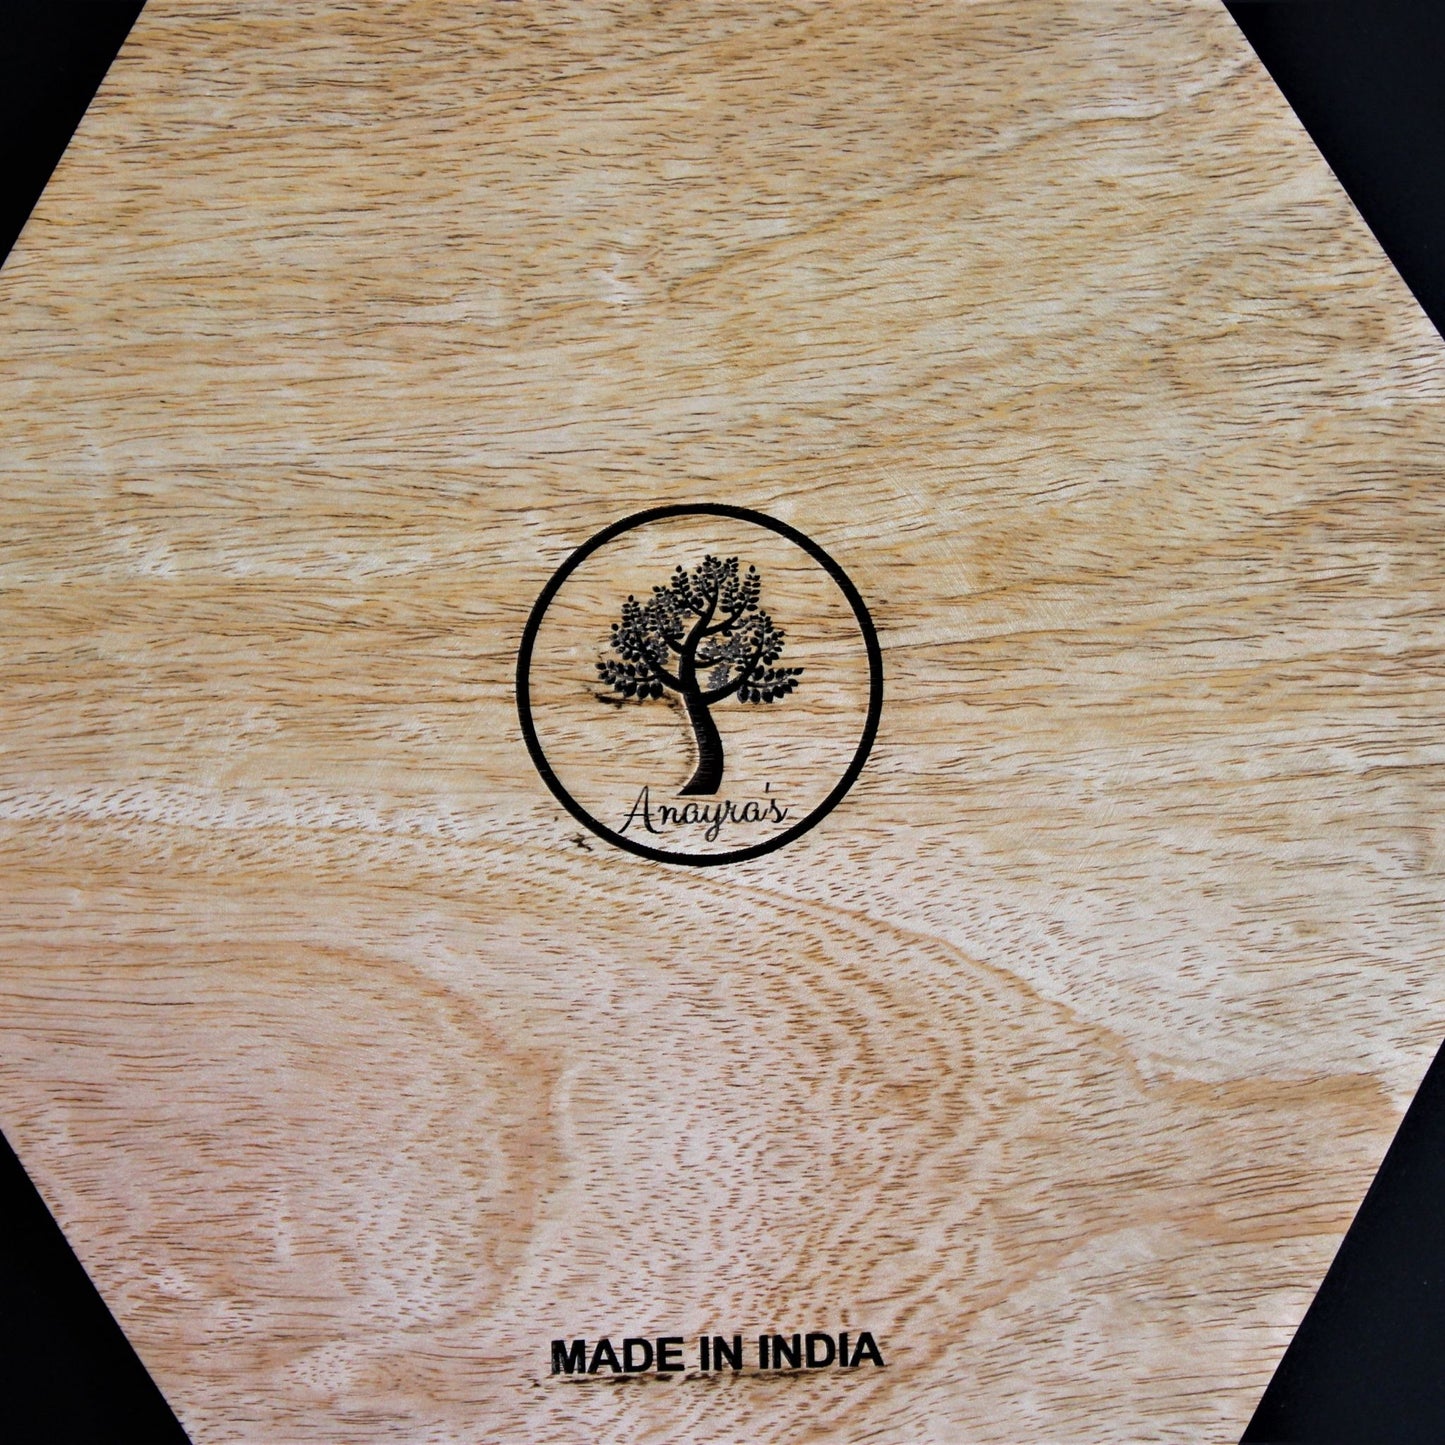 Handcrafted Sheesham & Mango Wood Dry Fruit / Dry Spice / Whole Spices Storage Box with Glass Top